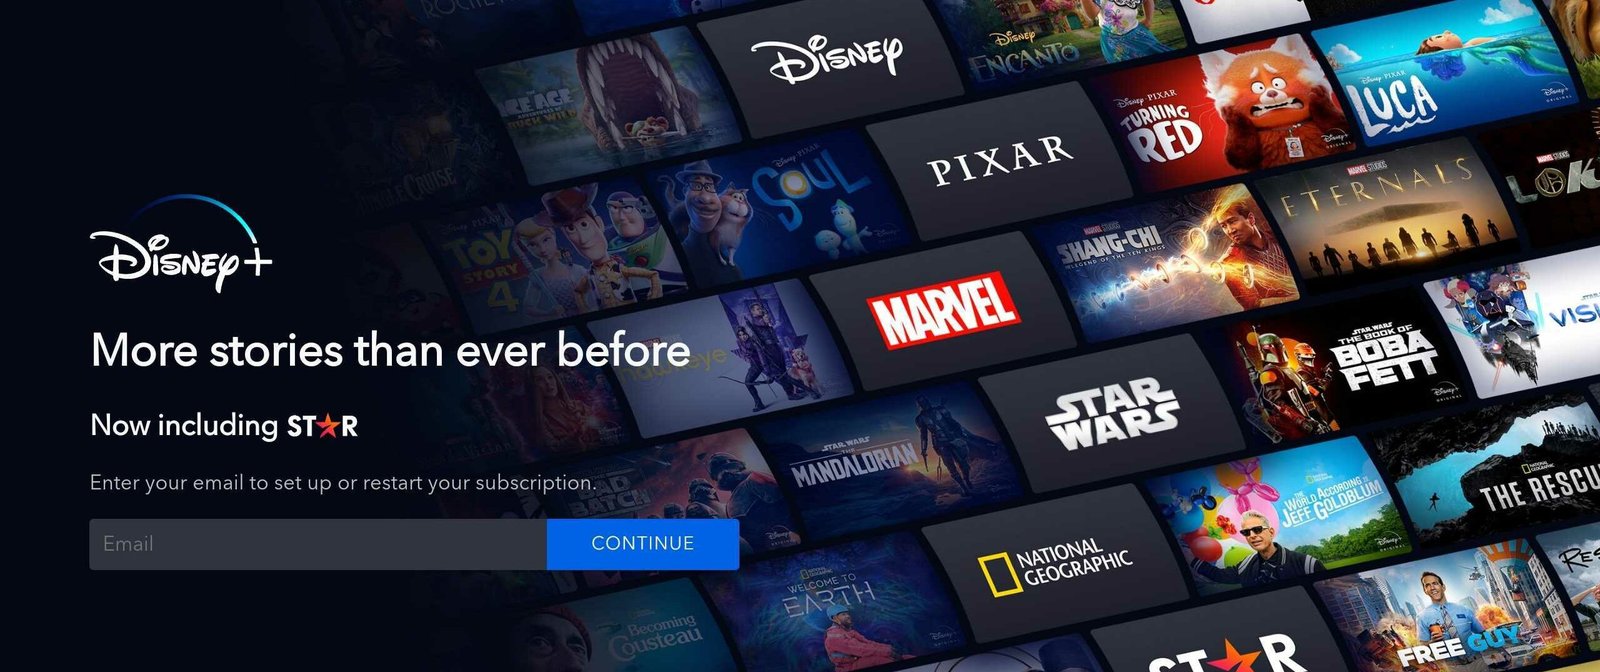 Example of CTA "Continue" being used on Disney+